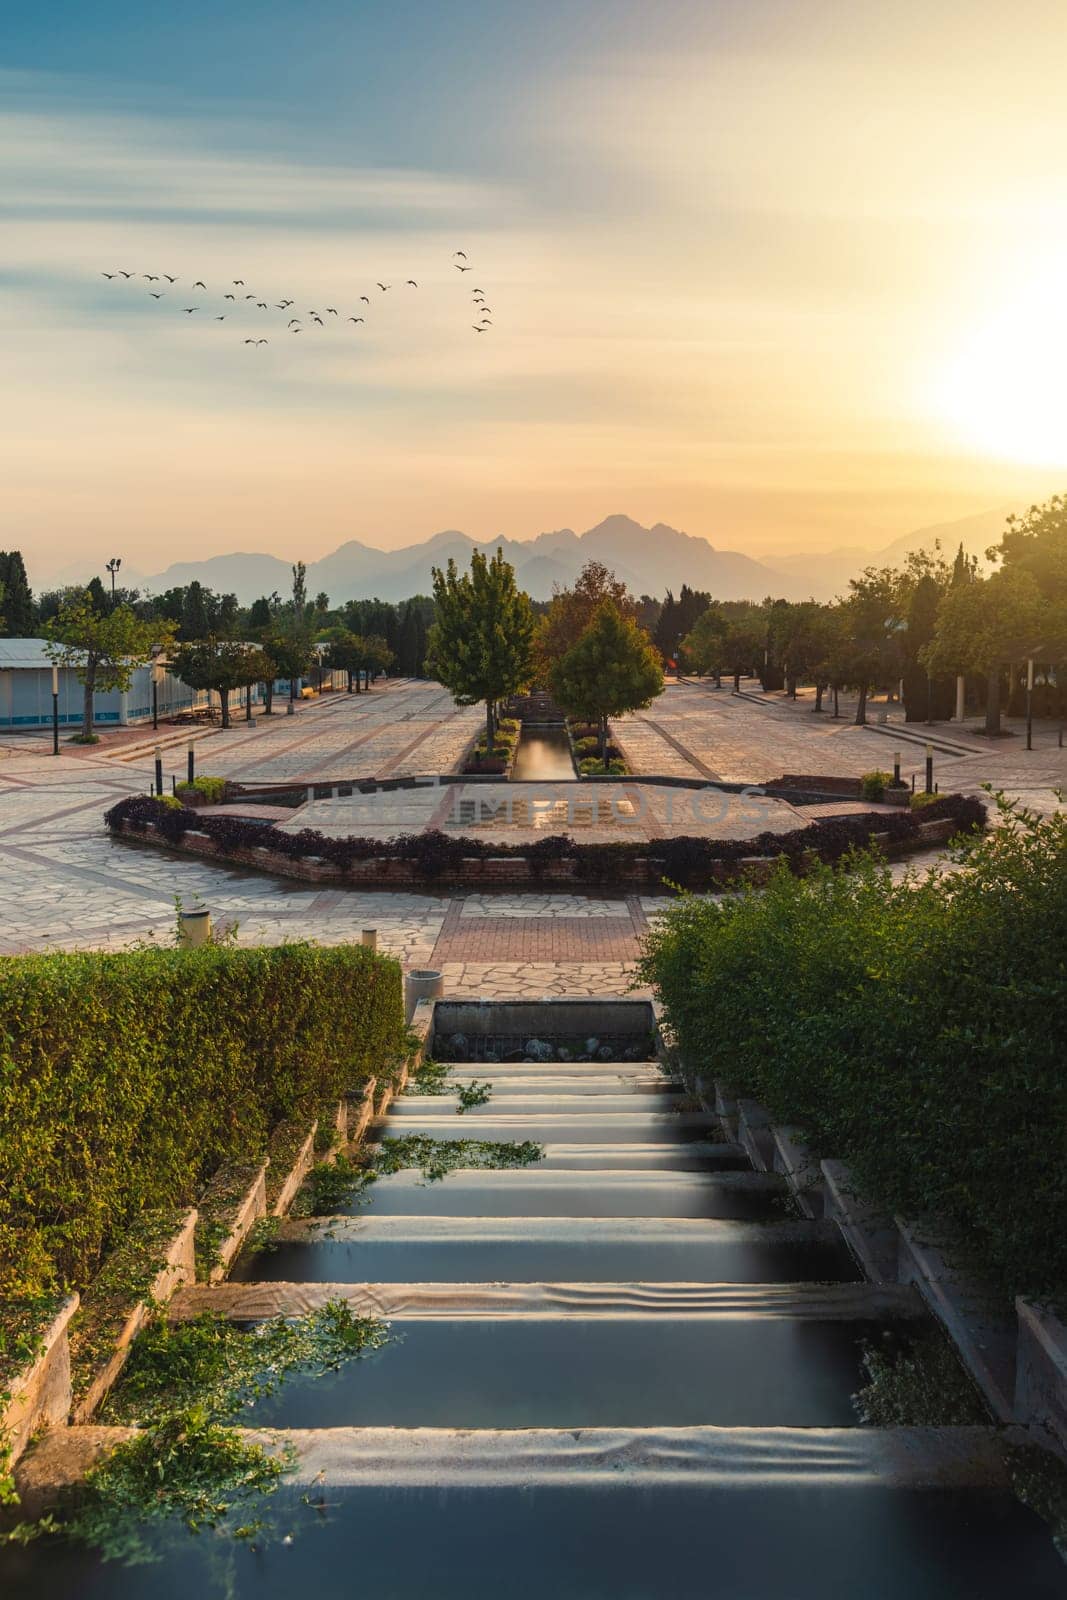 Sunset view of the walking path and ornamental pools in front of Antalya Glass Pyramid by Sonat